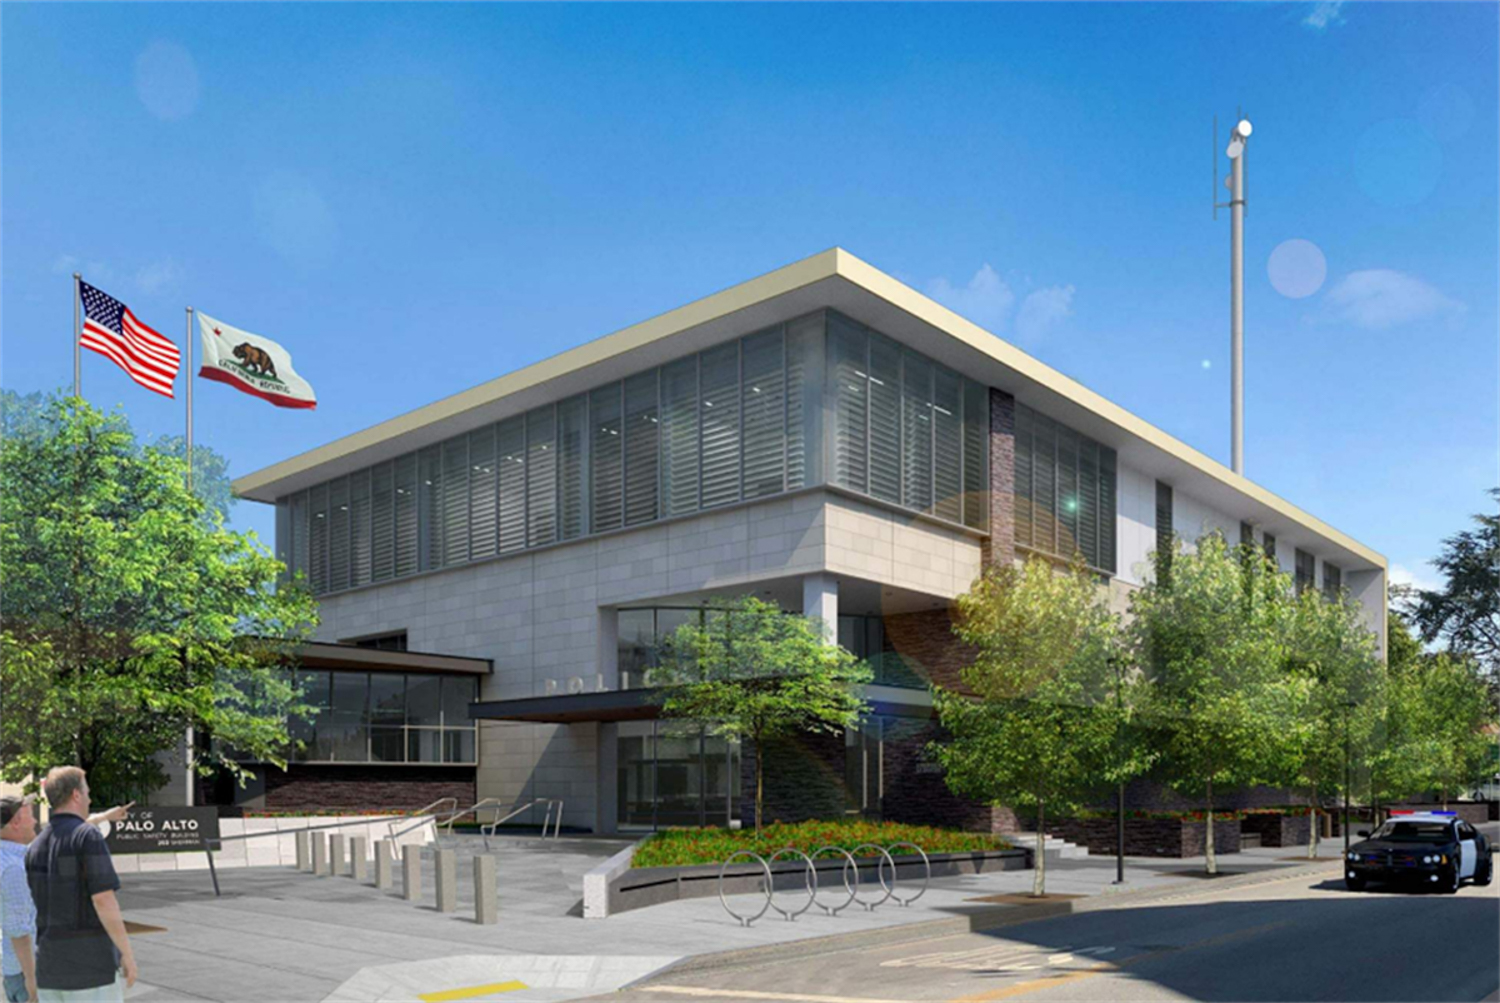 Palo Alto Public Safety Building establishing view, rendering by Ross Drulis Cusenbery Architecture courtesy the City of Palo Alto